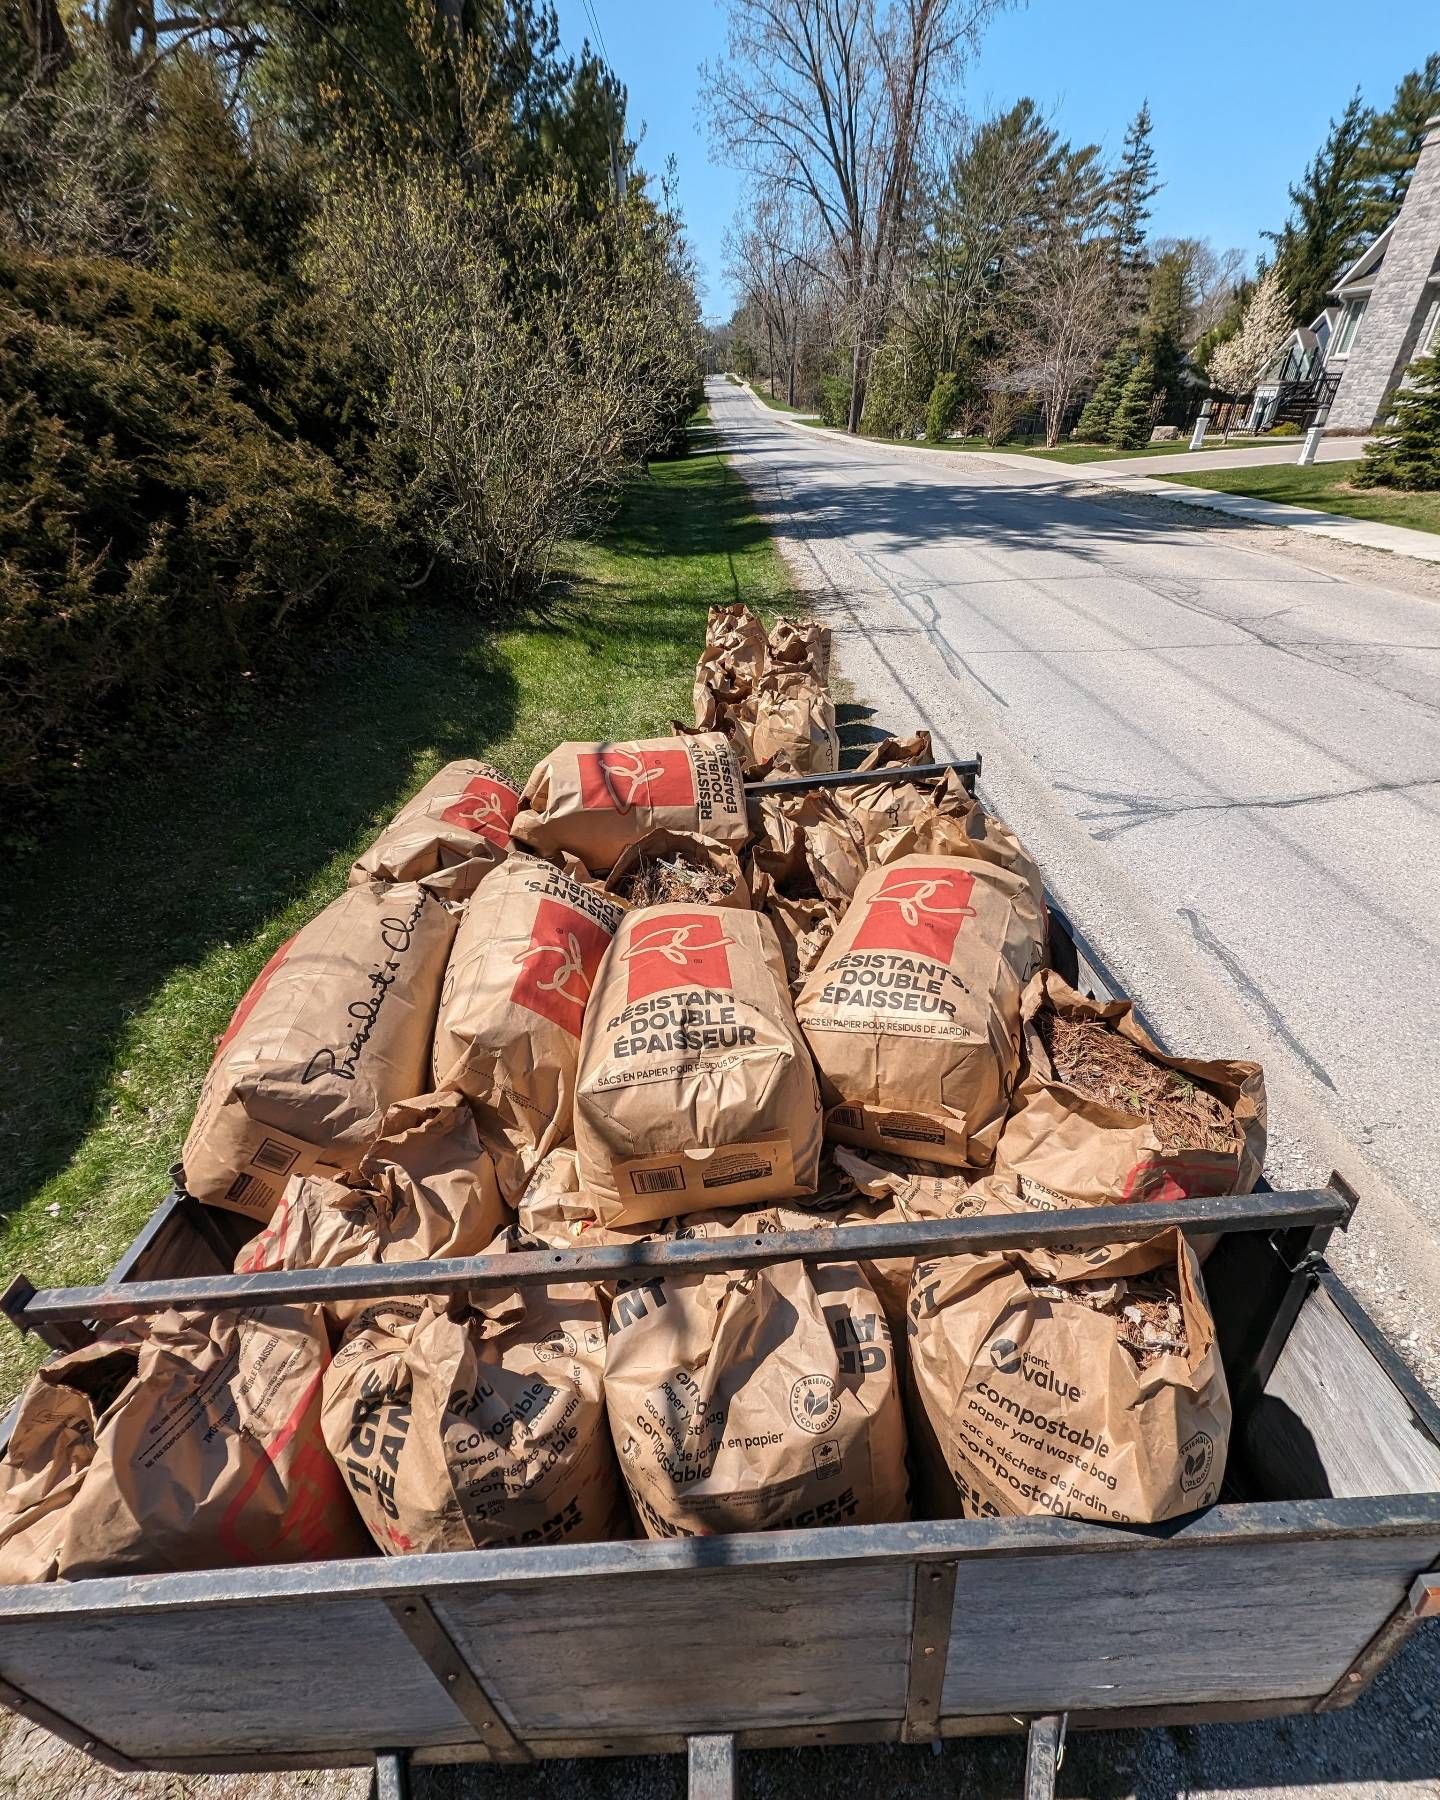 Lost count but we must have filled and emptied 60+bags all together yesterday! Wowzers are my arms sore today! Thankfully it's Fri-Yah and it's almost the weekend! ✨🎉
#nomoreleaves #leafcollection #leafpile #springfever #springcleaning